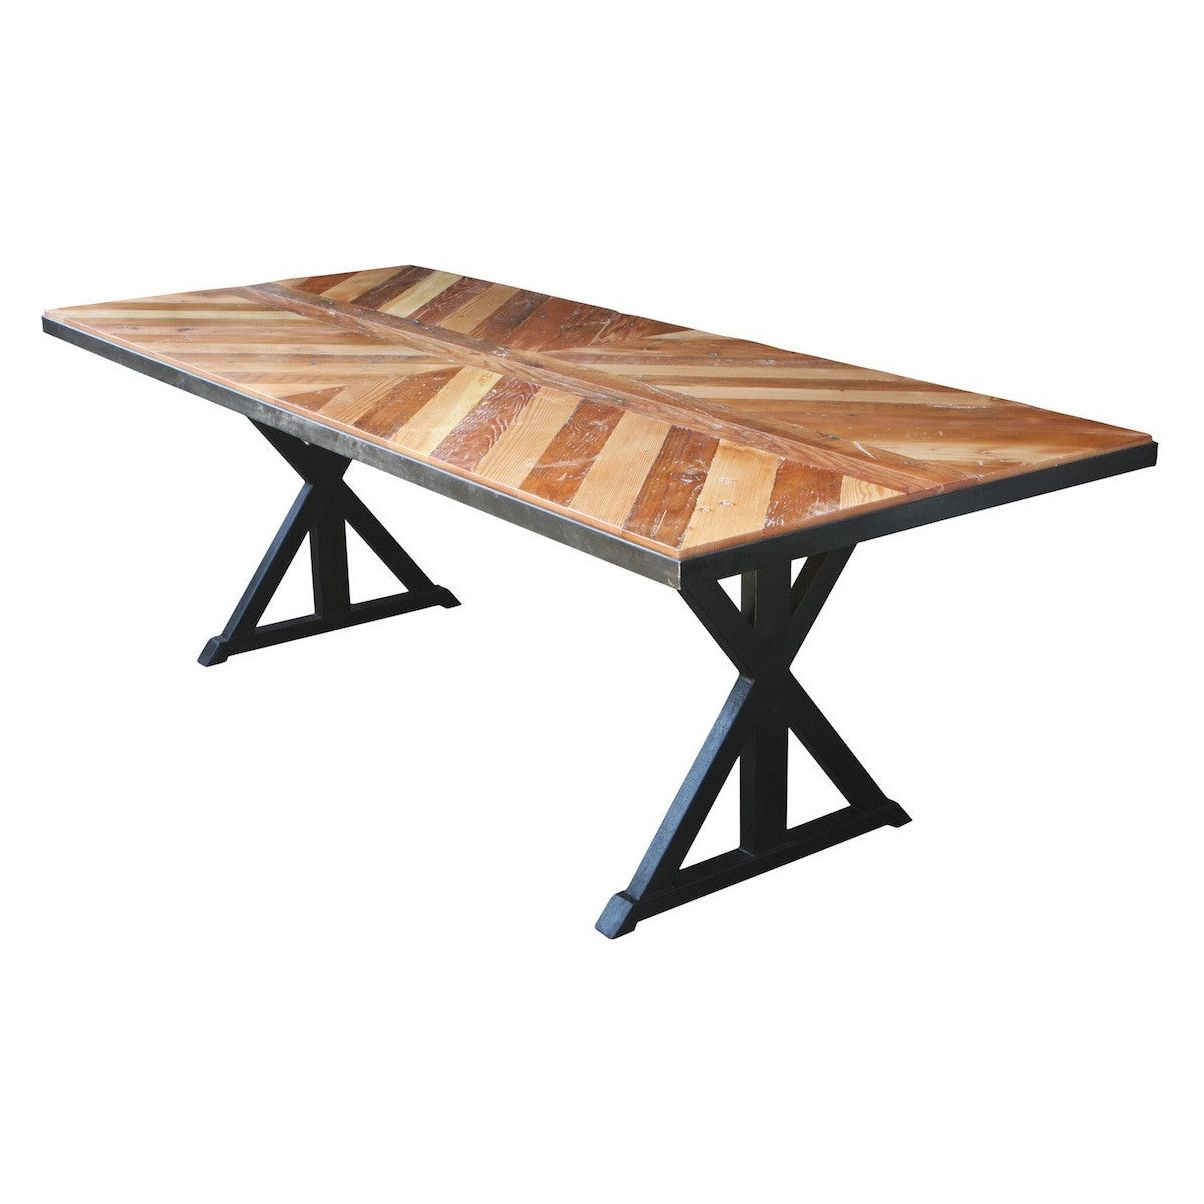 Chevron Top Dining Table built in reclaimed wood and metal legs